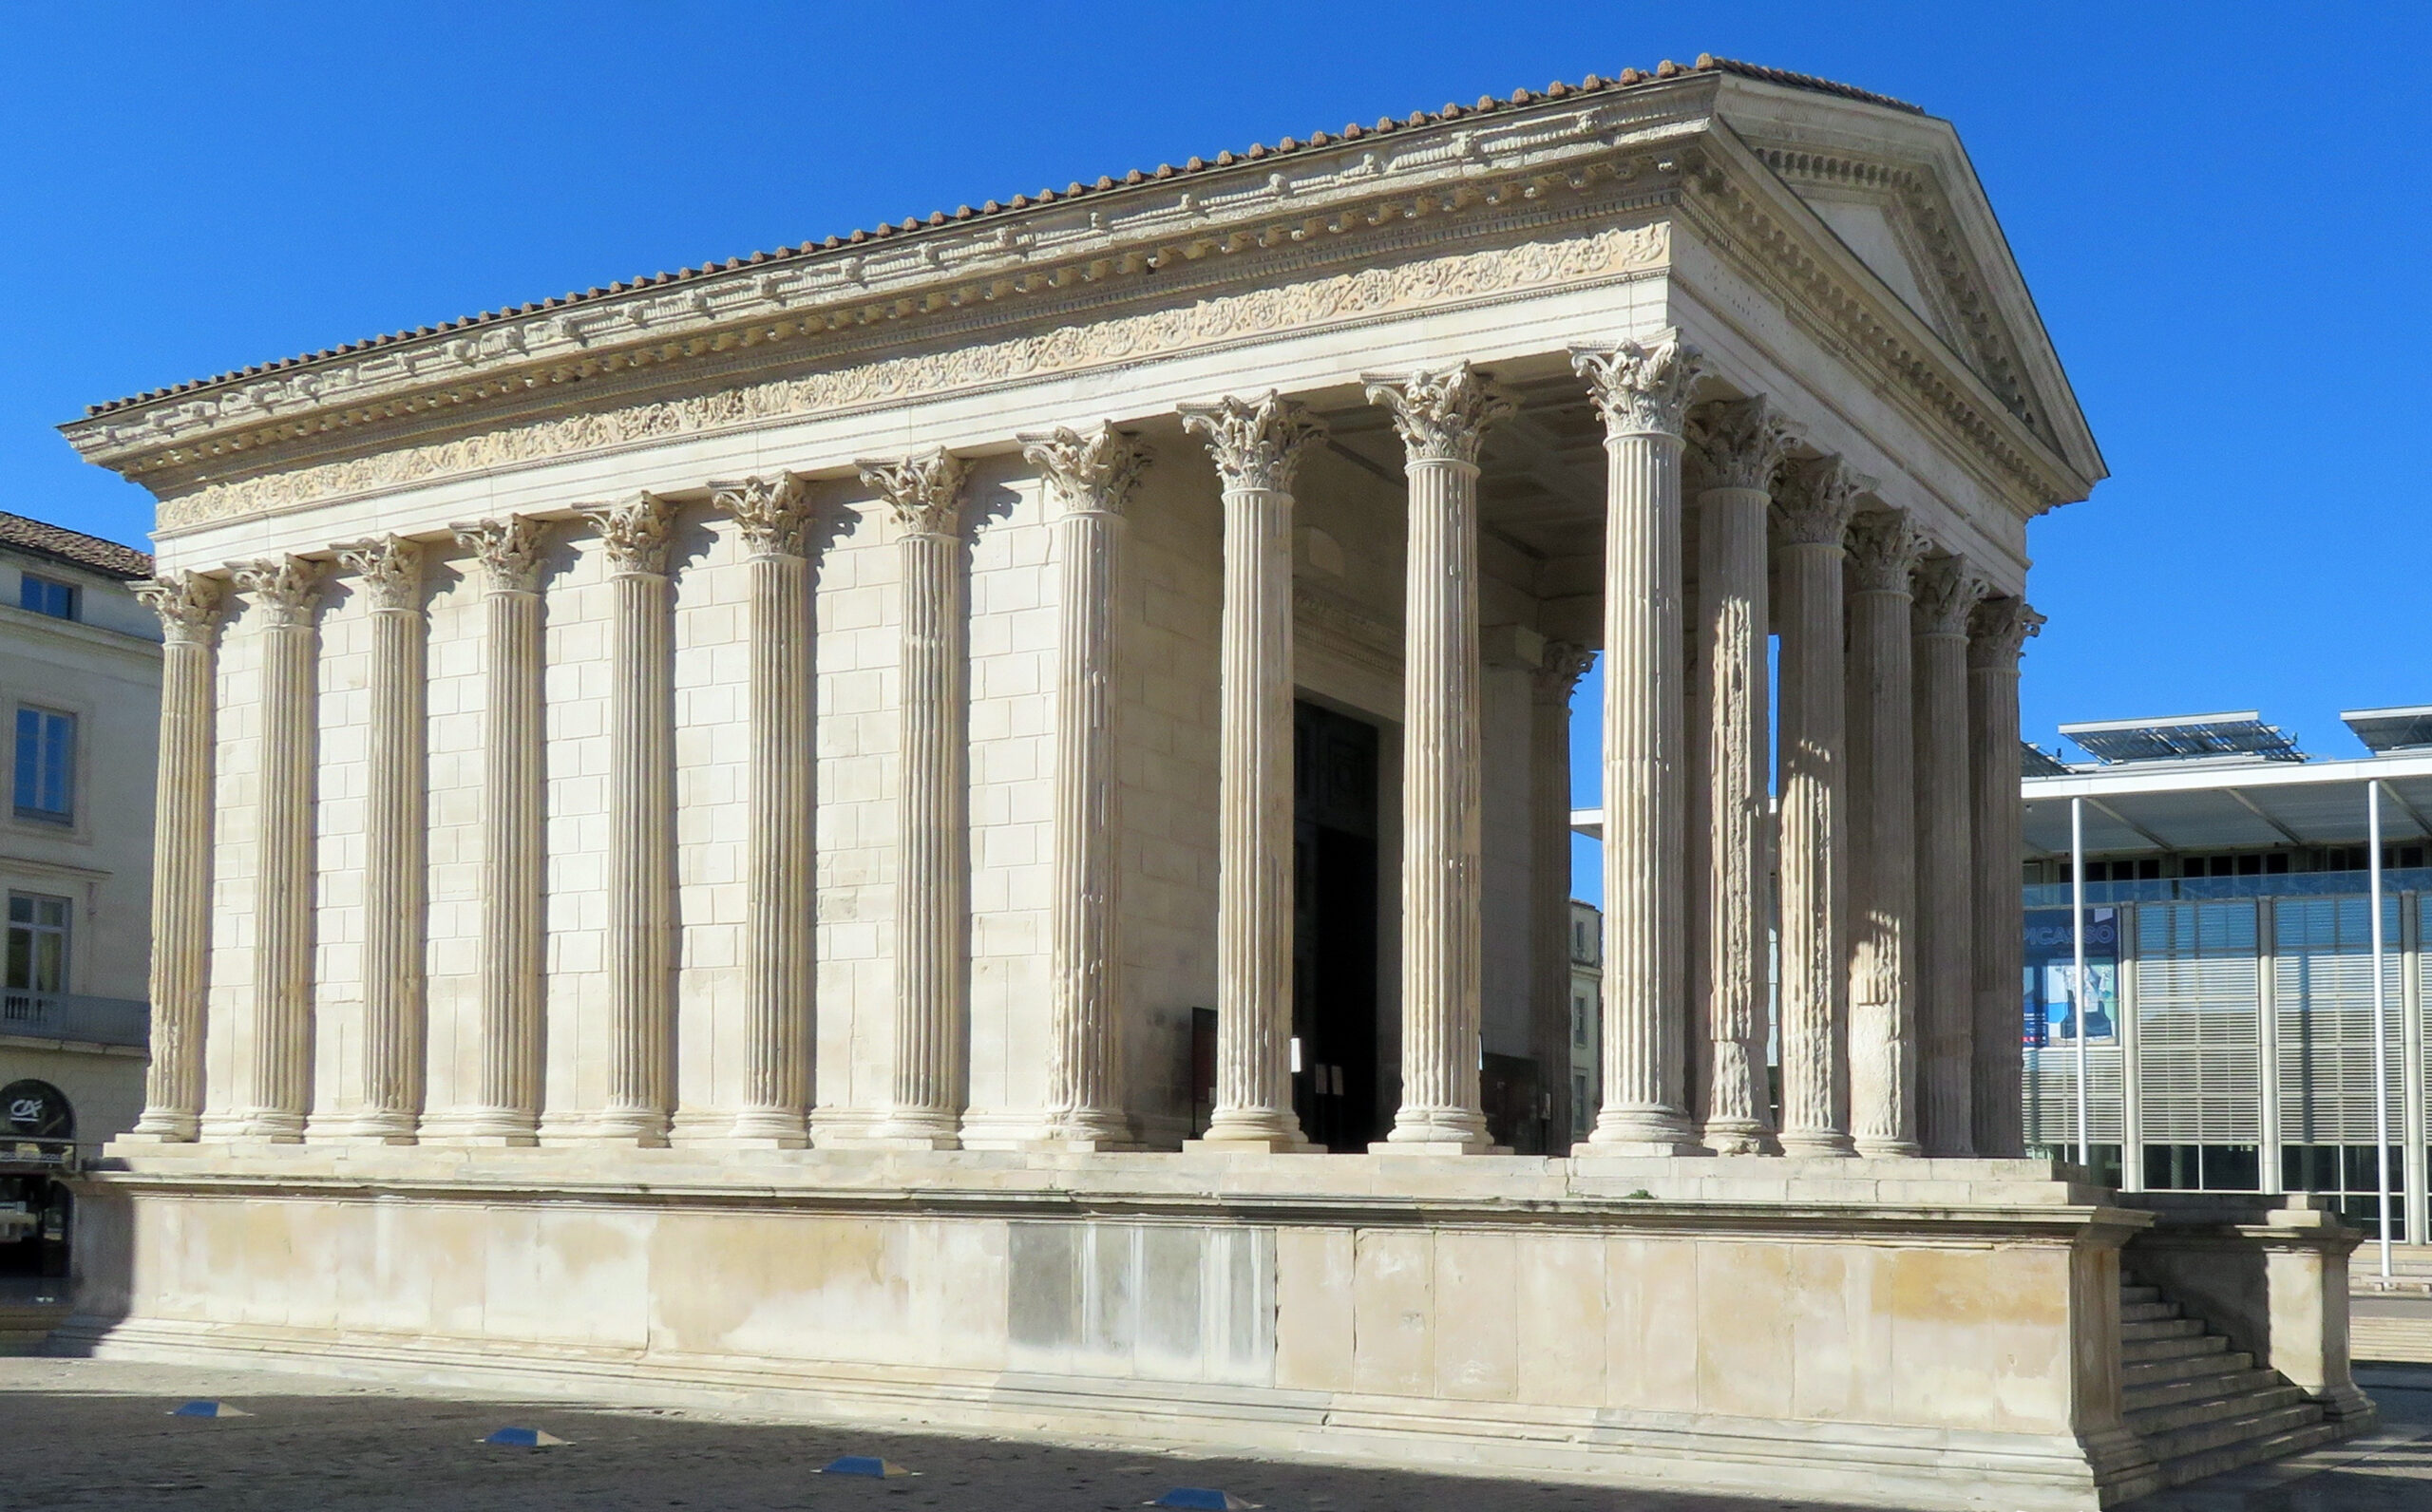 The Maison Carrée was listed as a UNESCO World Heritage Site in 2023. Maison Carrée, Nîmes, Provence, c. 4–7 C.E., 26.42 x 2.85 x 13.54 m (photo: Dr. Kimberly Cassibry, CC BY-NC-SA 4.0)